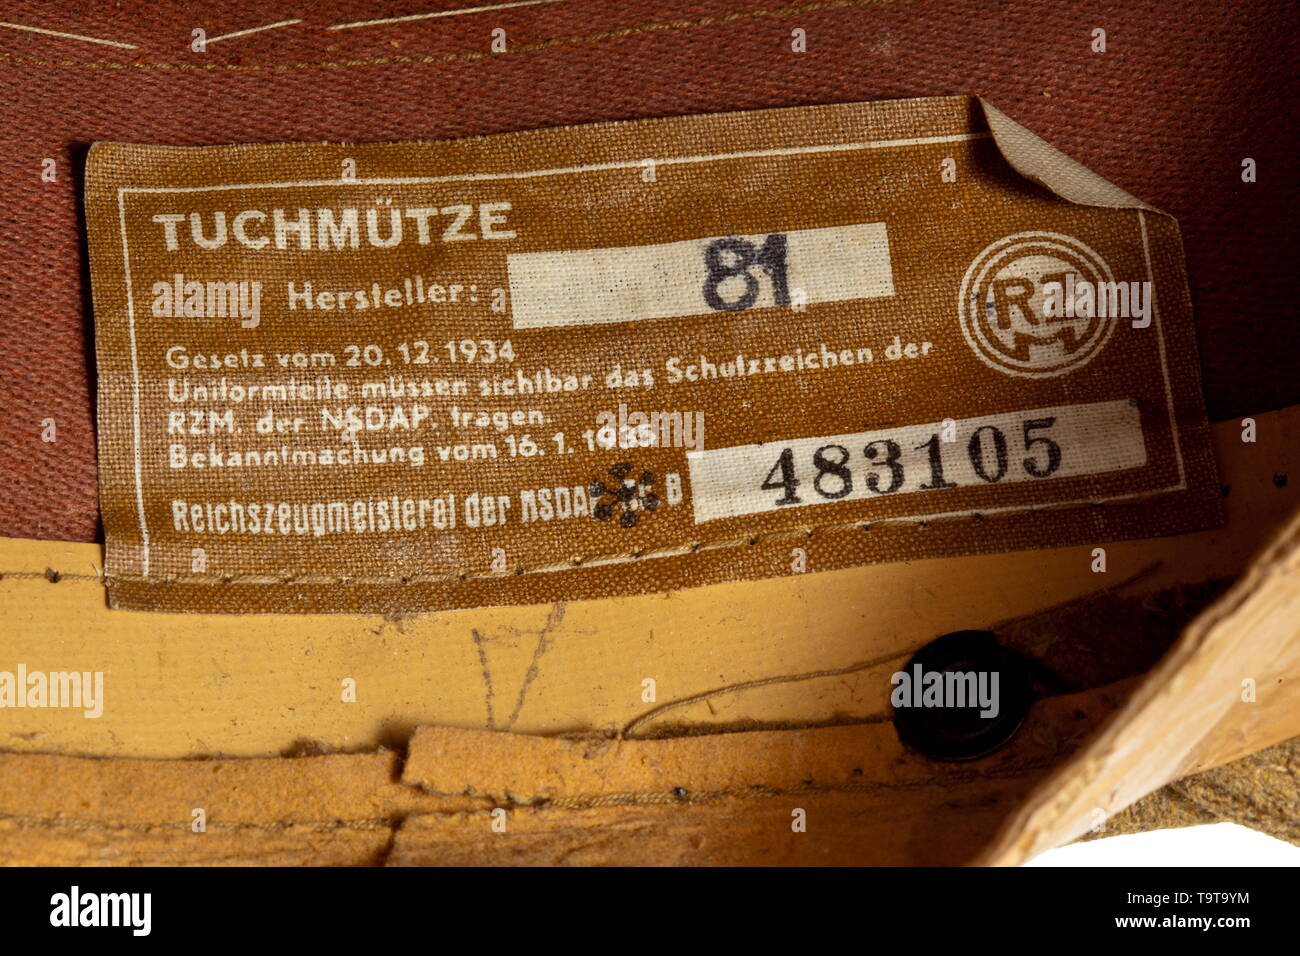 A kepi for a Sturmbannführer of an SA group staff depot piece with RZM tag historic, historical, 20th century, Editorial-Use-Only Stock Photo